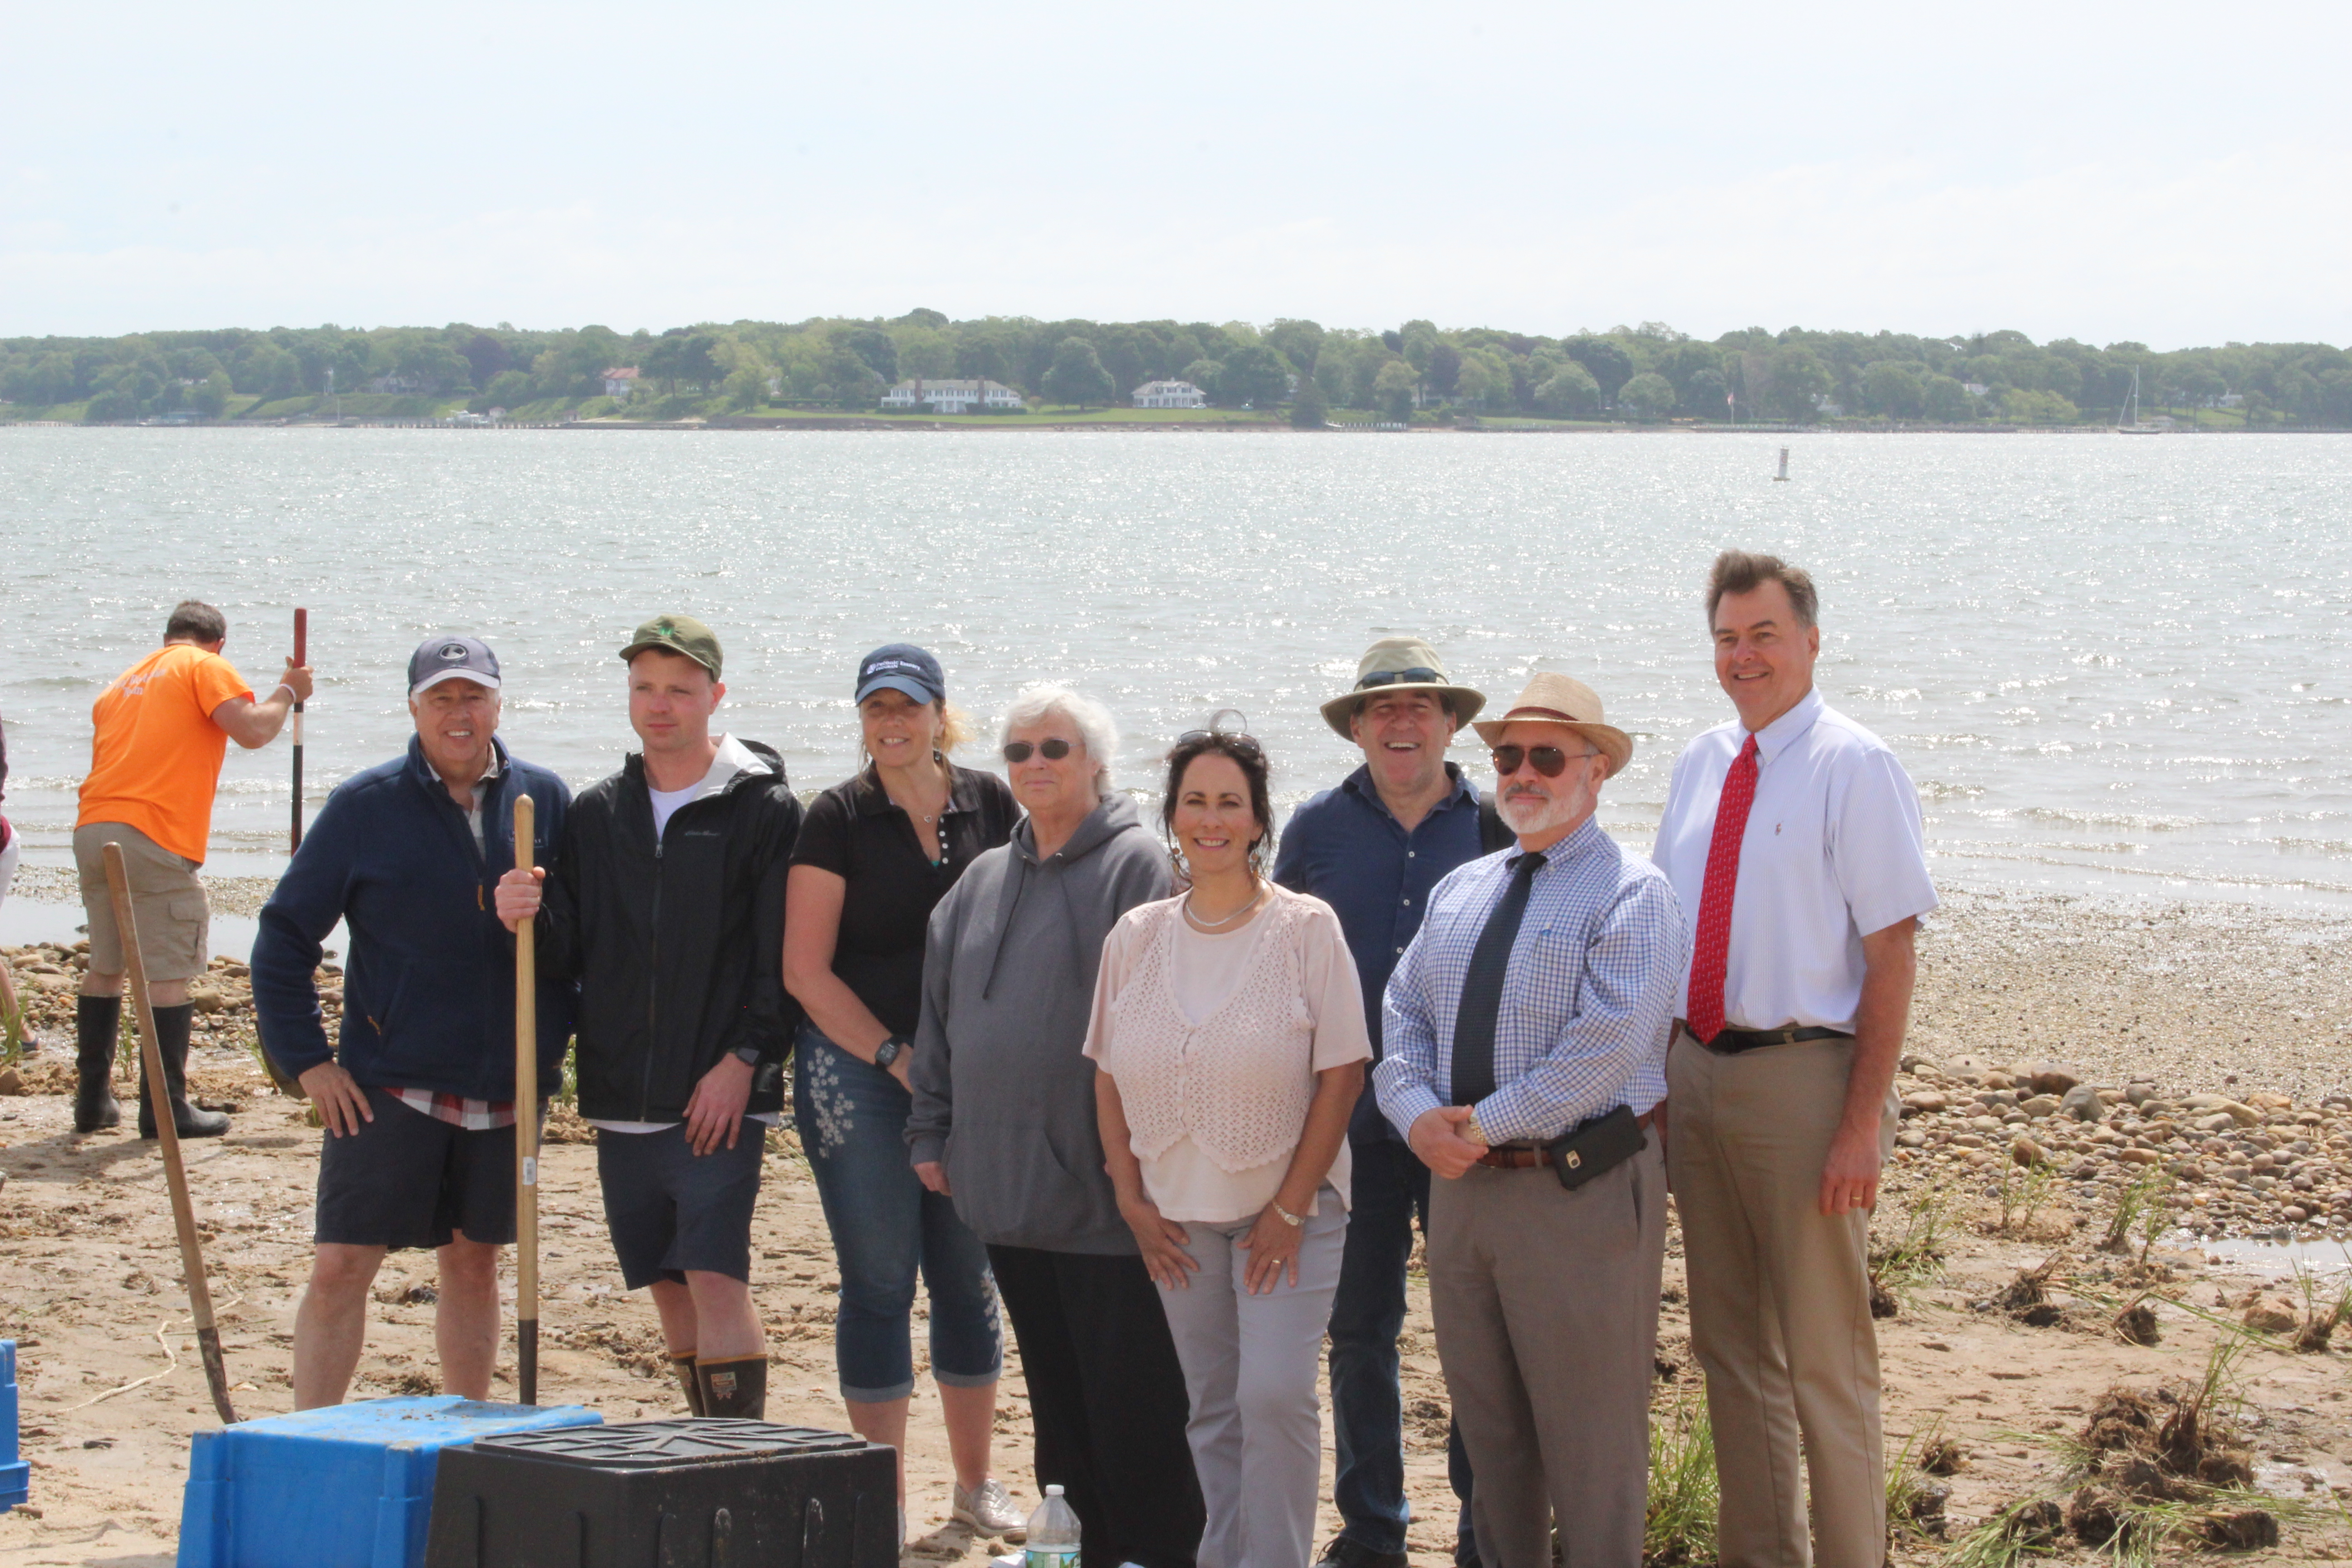 Peconic Land Trust staff and others at the Widow's Hole Preserve